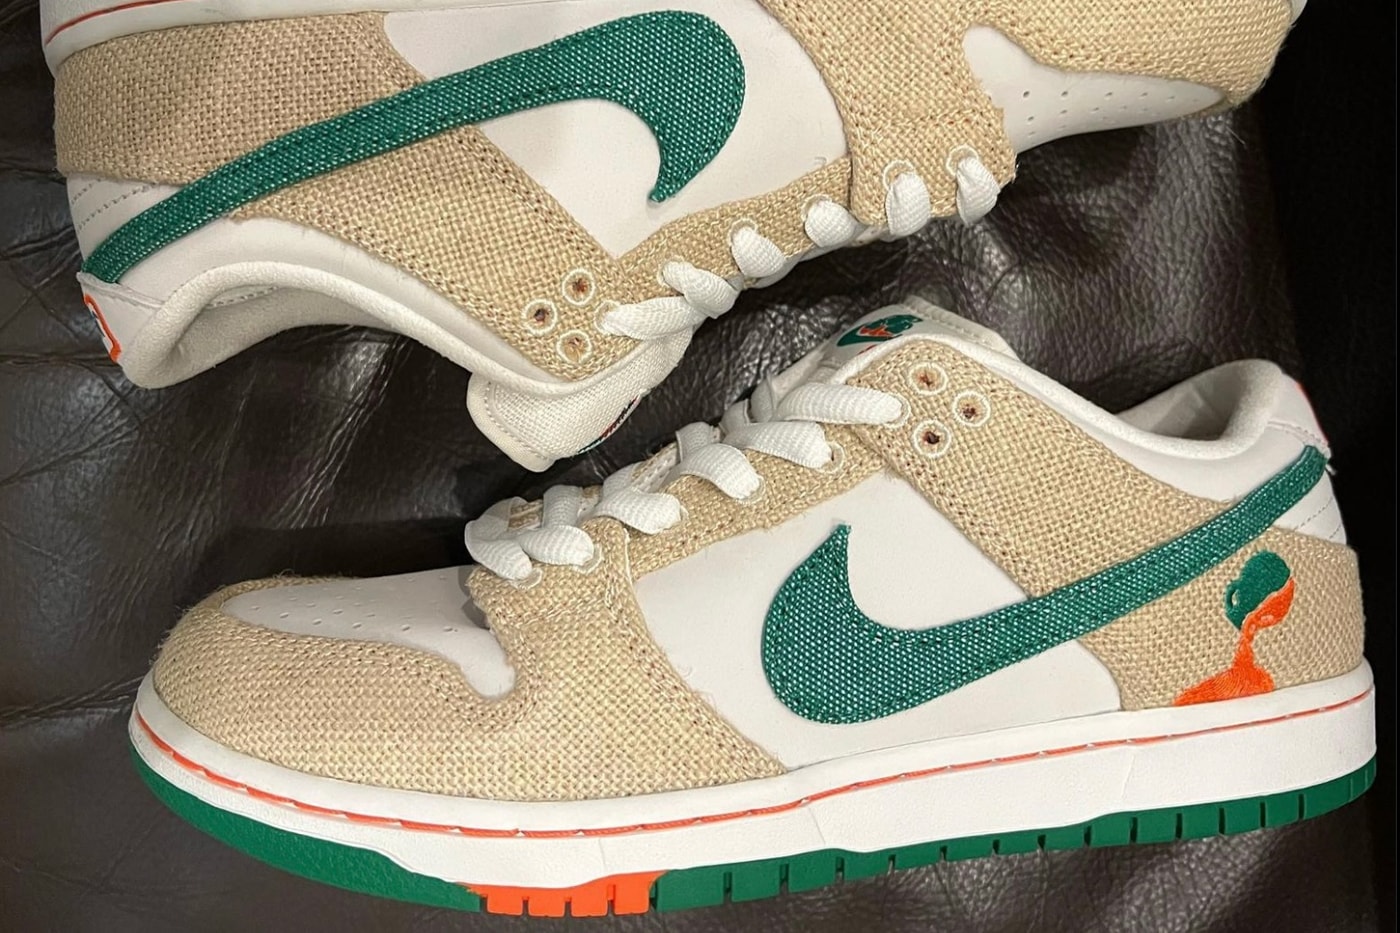 Jarritos x Nike SB Dunk Low Images, Release Info